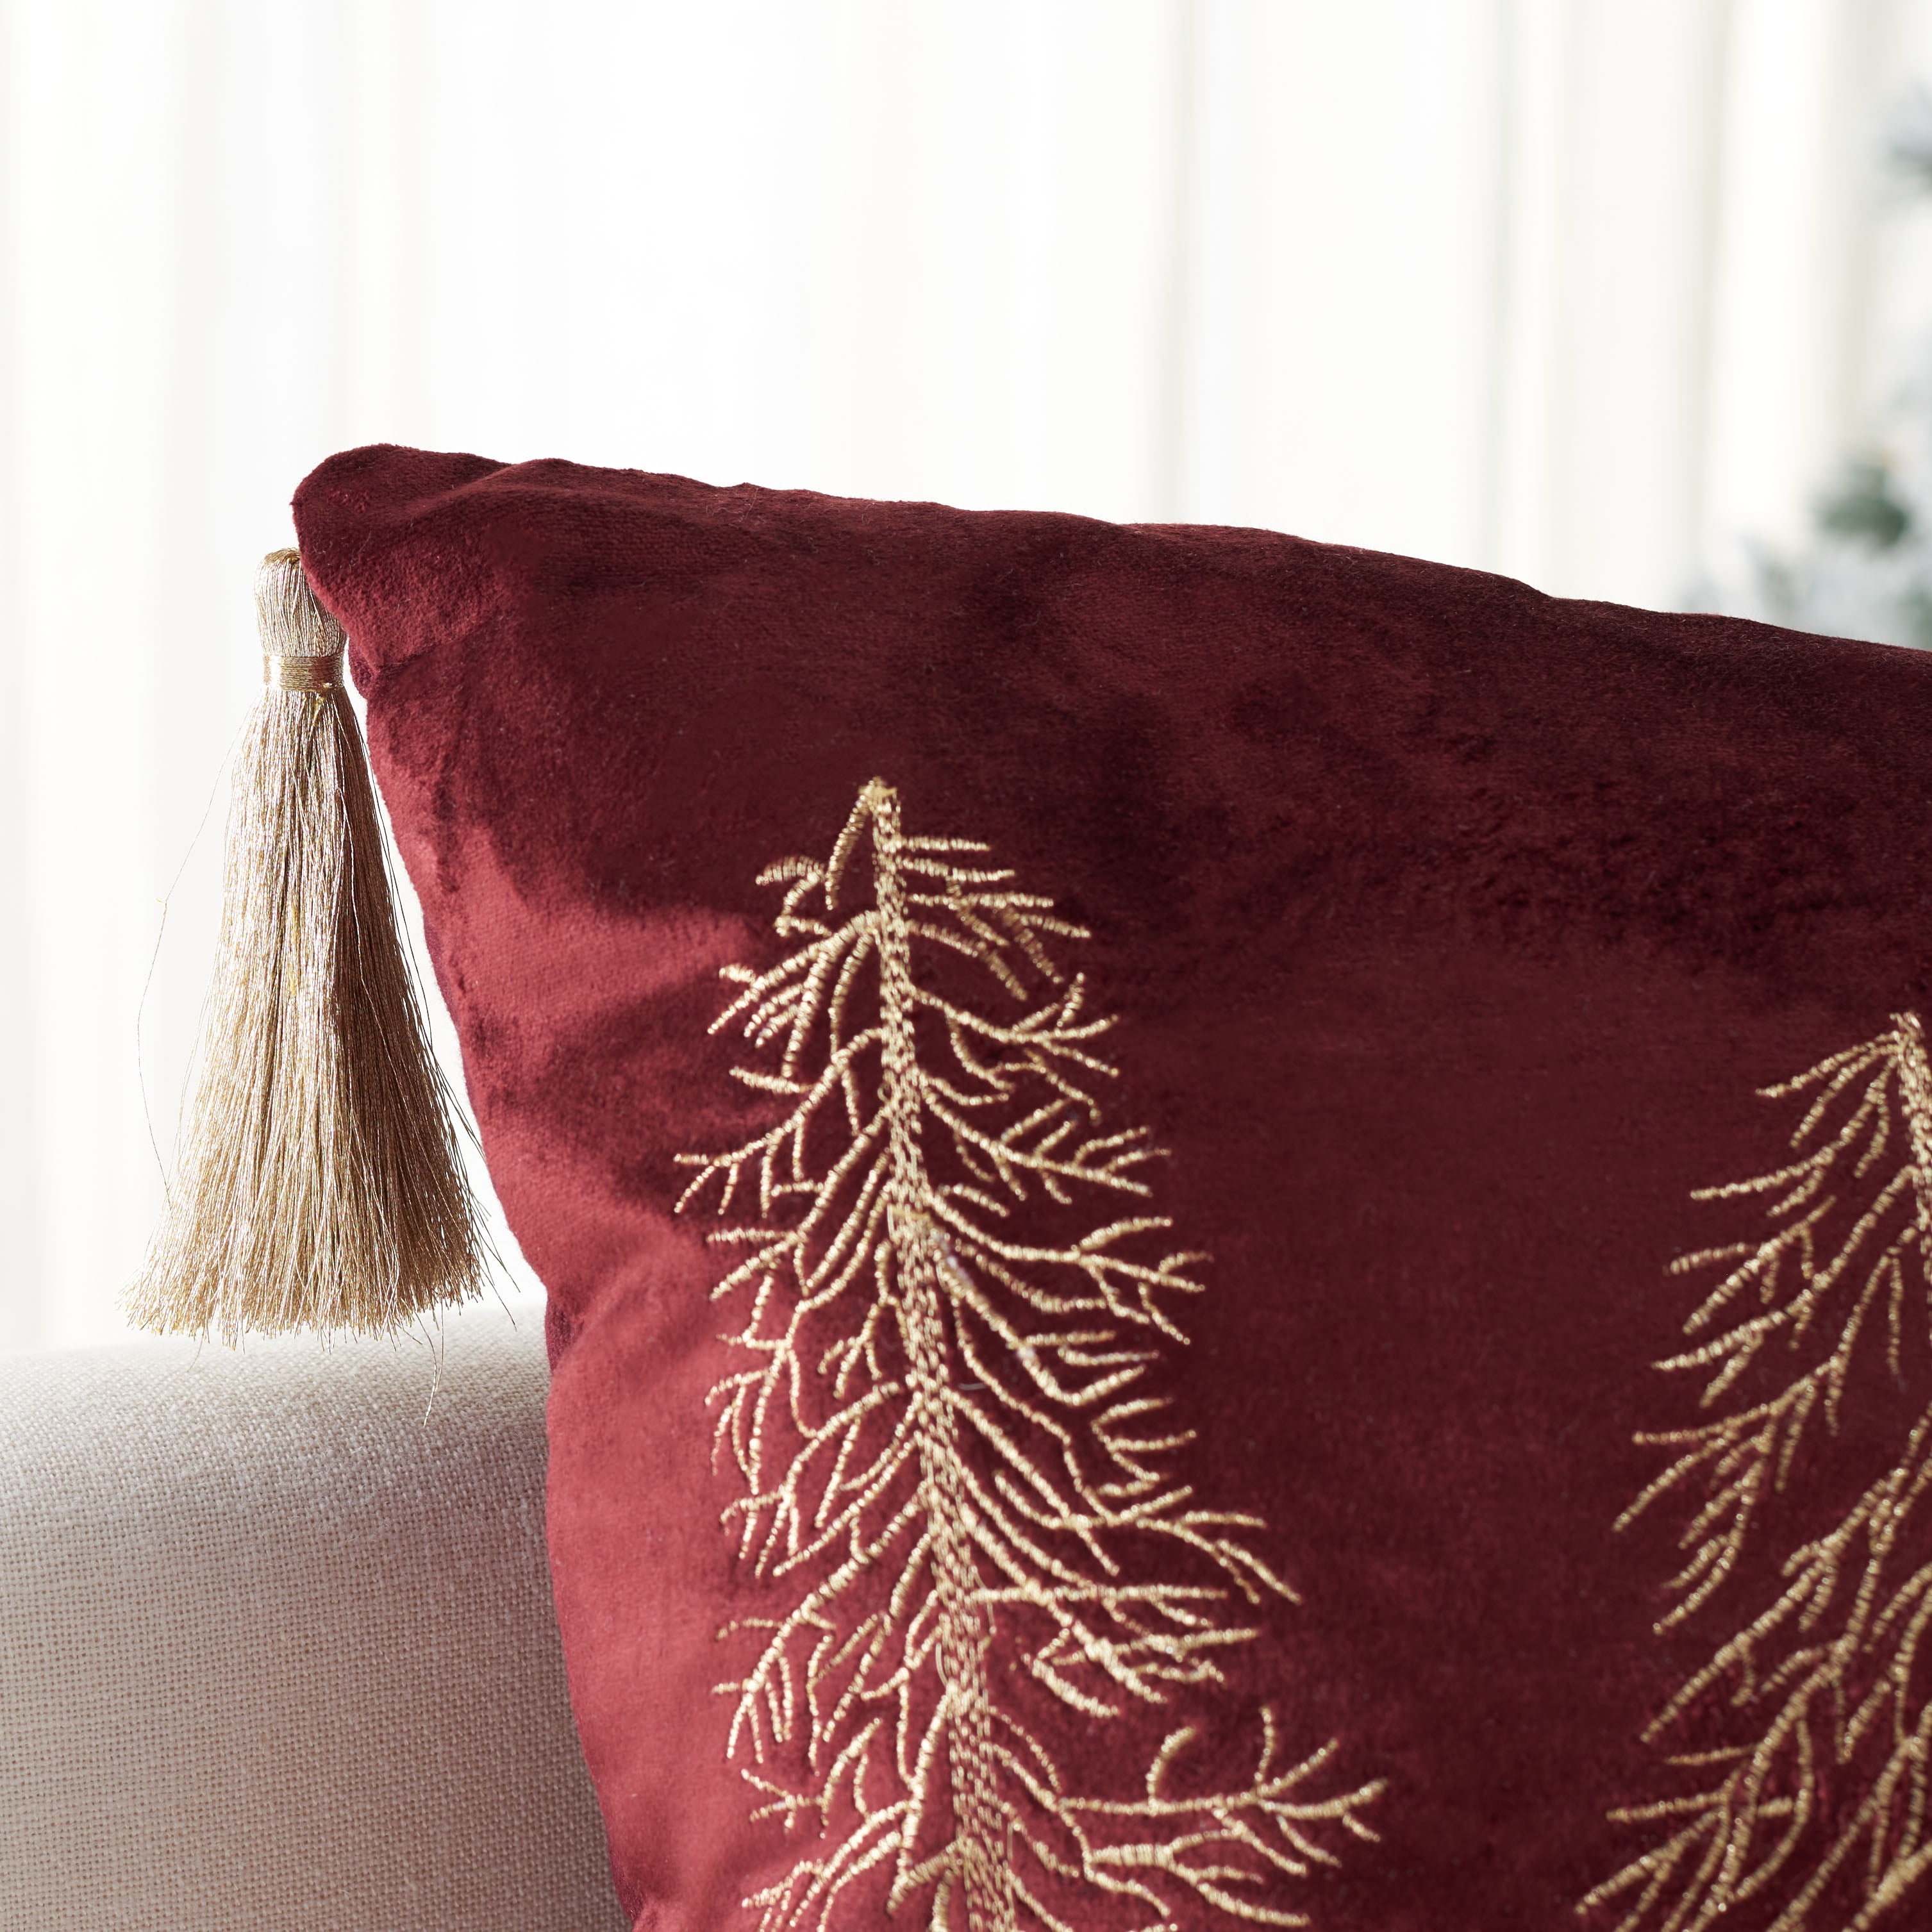 Country House Collection Burgundy Farmhouse Star 16 Pillow